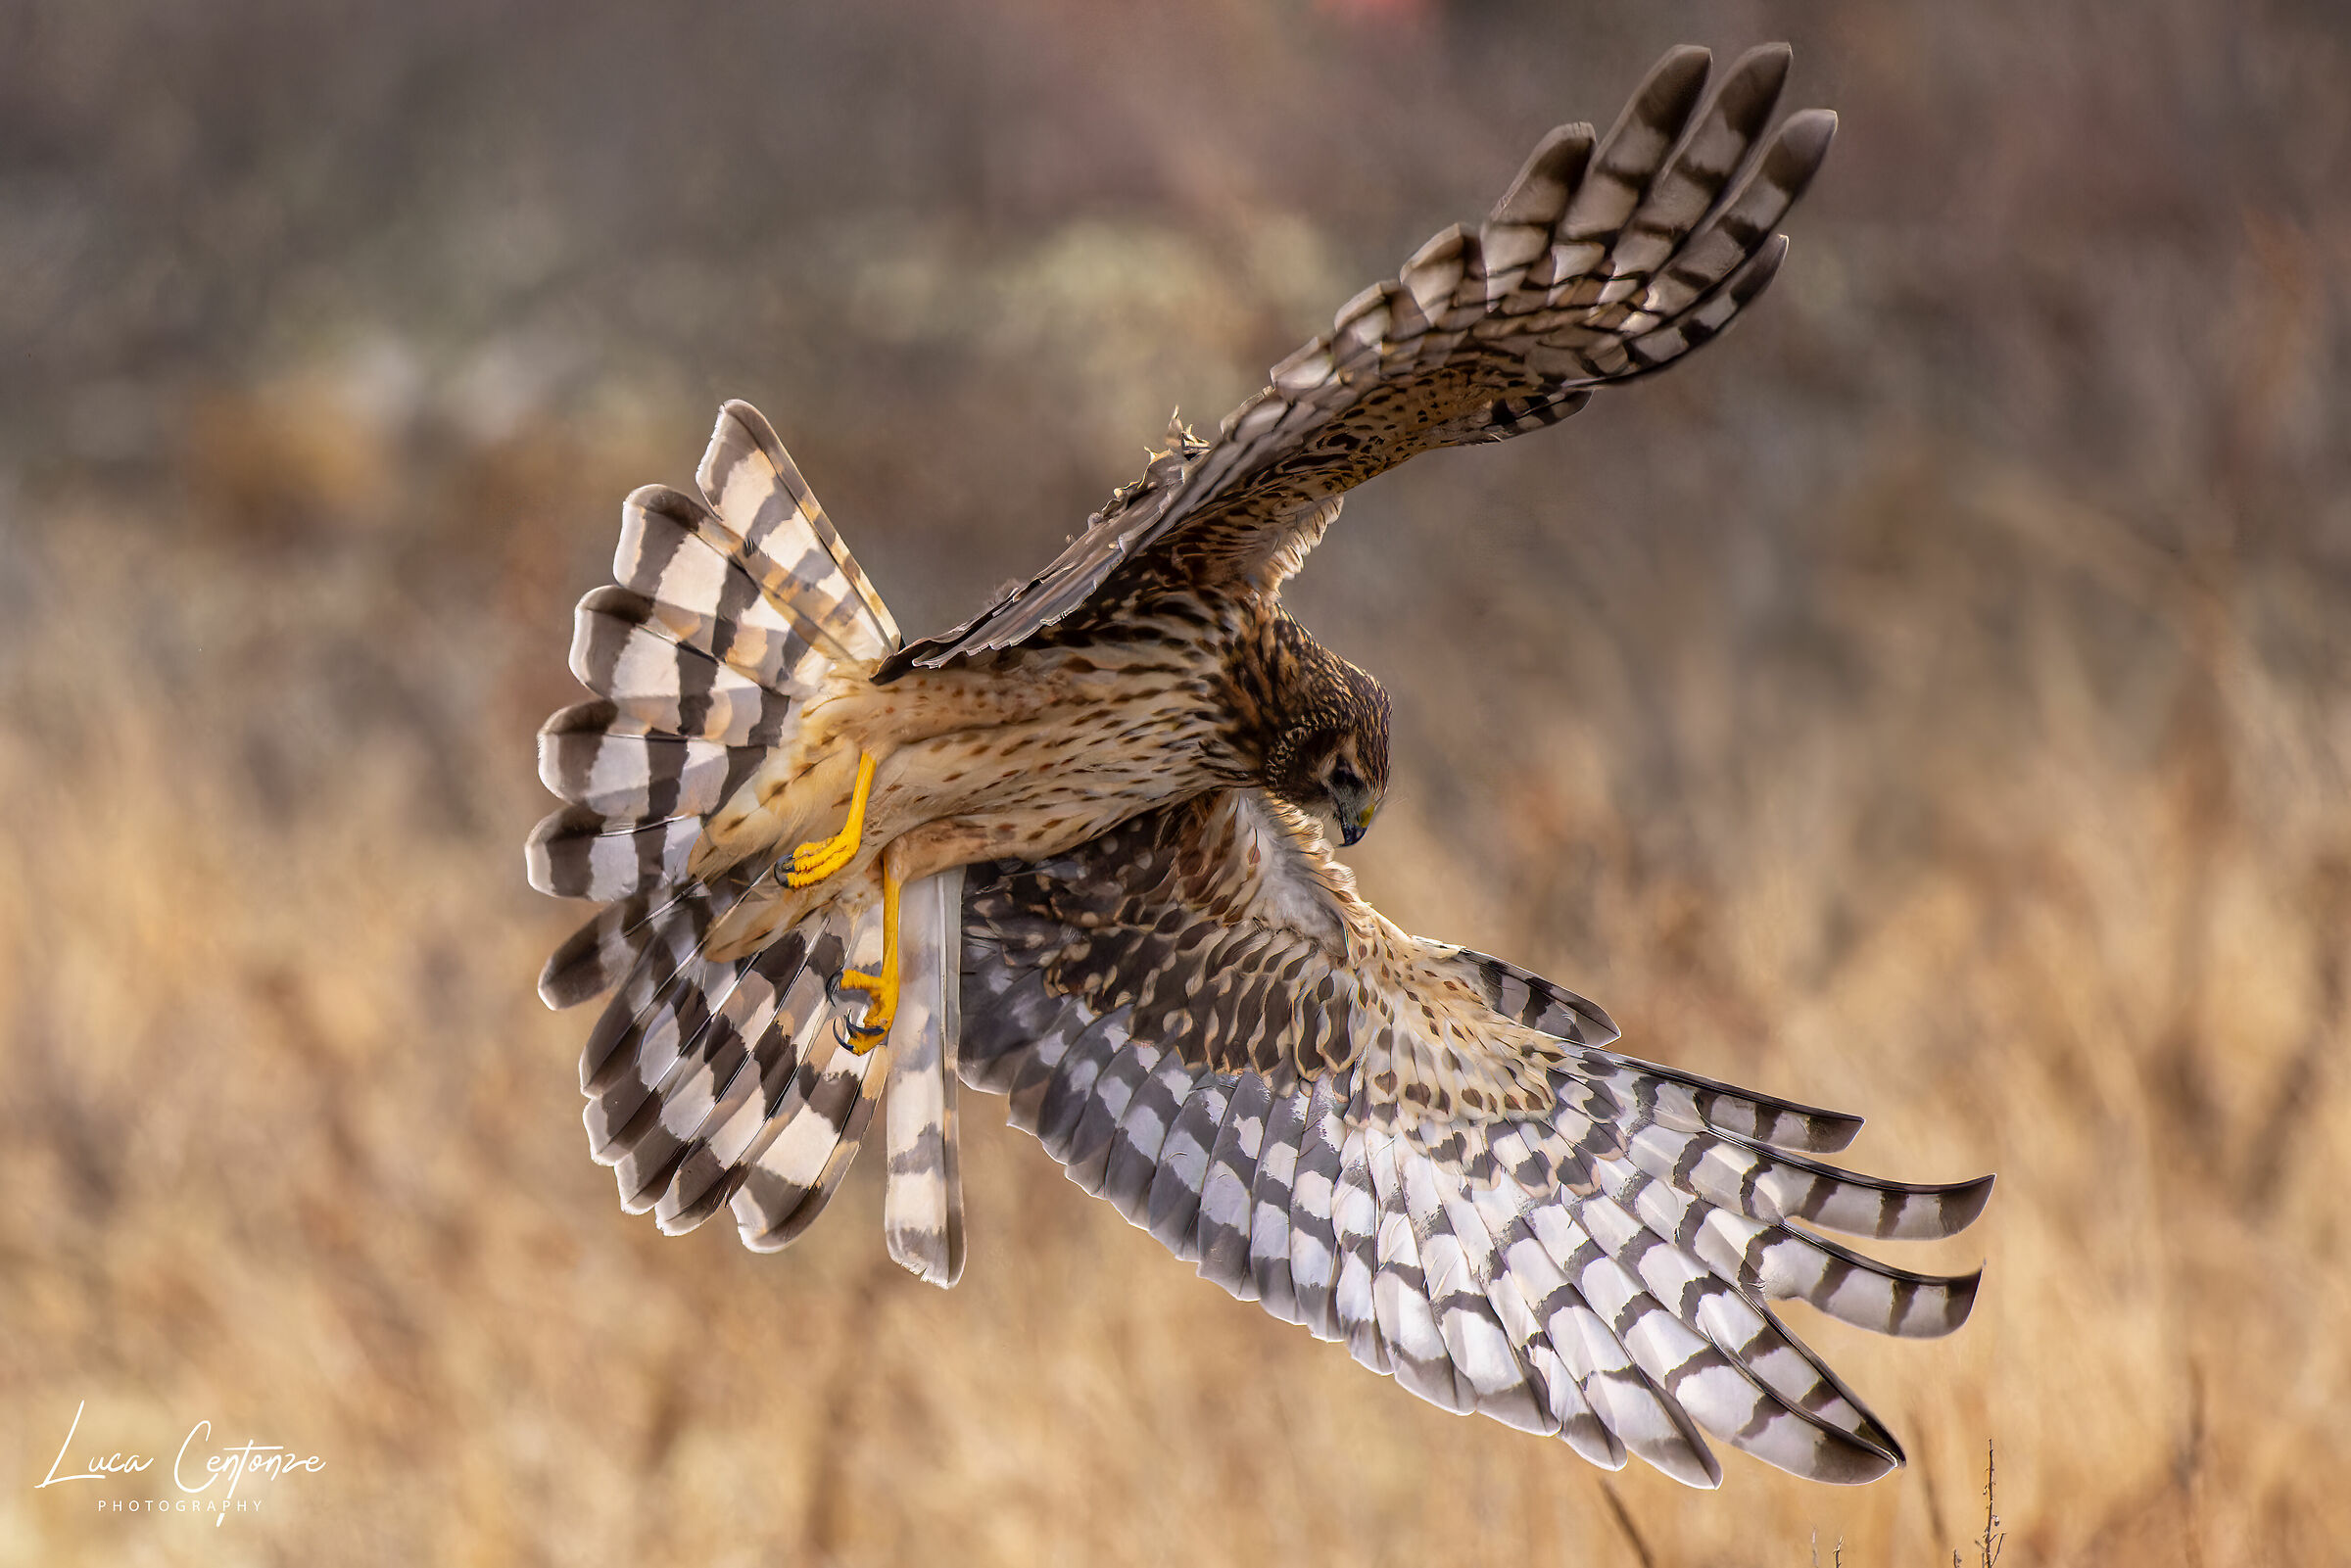 Northern Harrier (Circus hudsonius) on the hunt ...